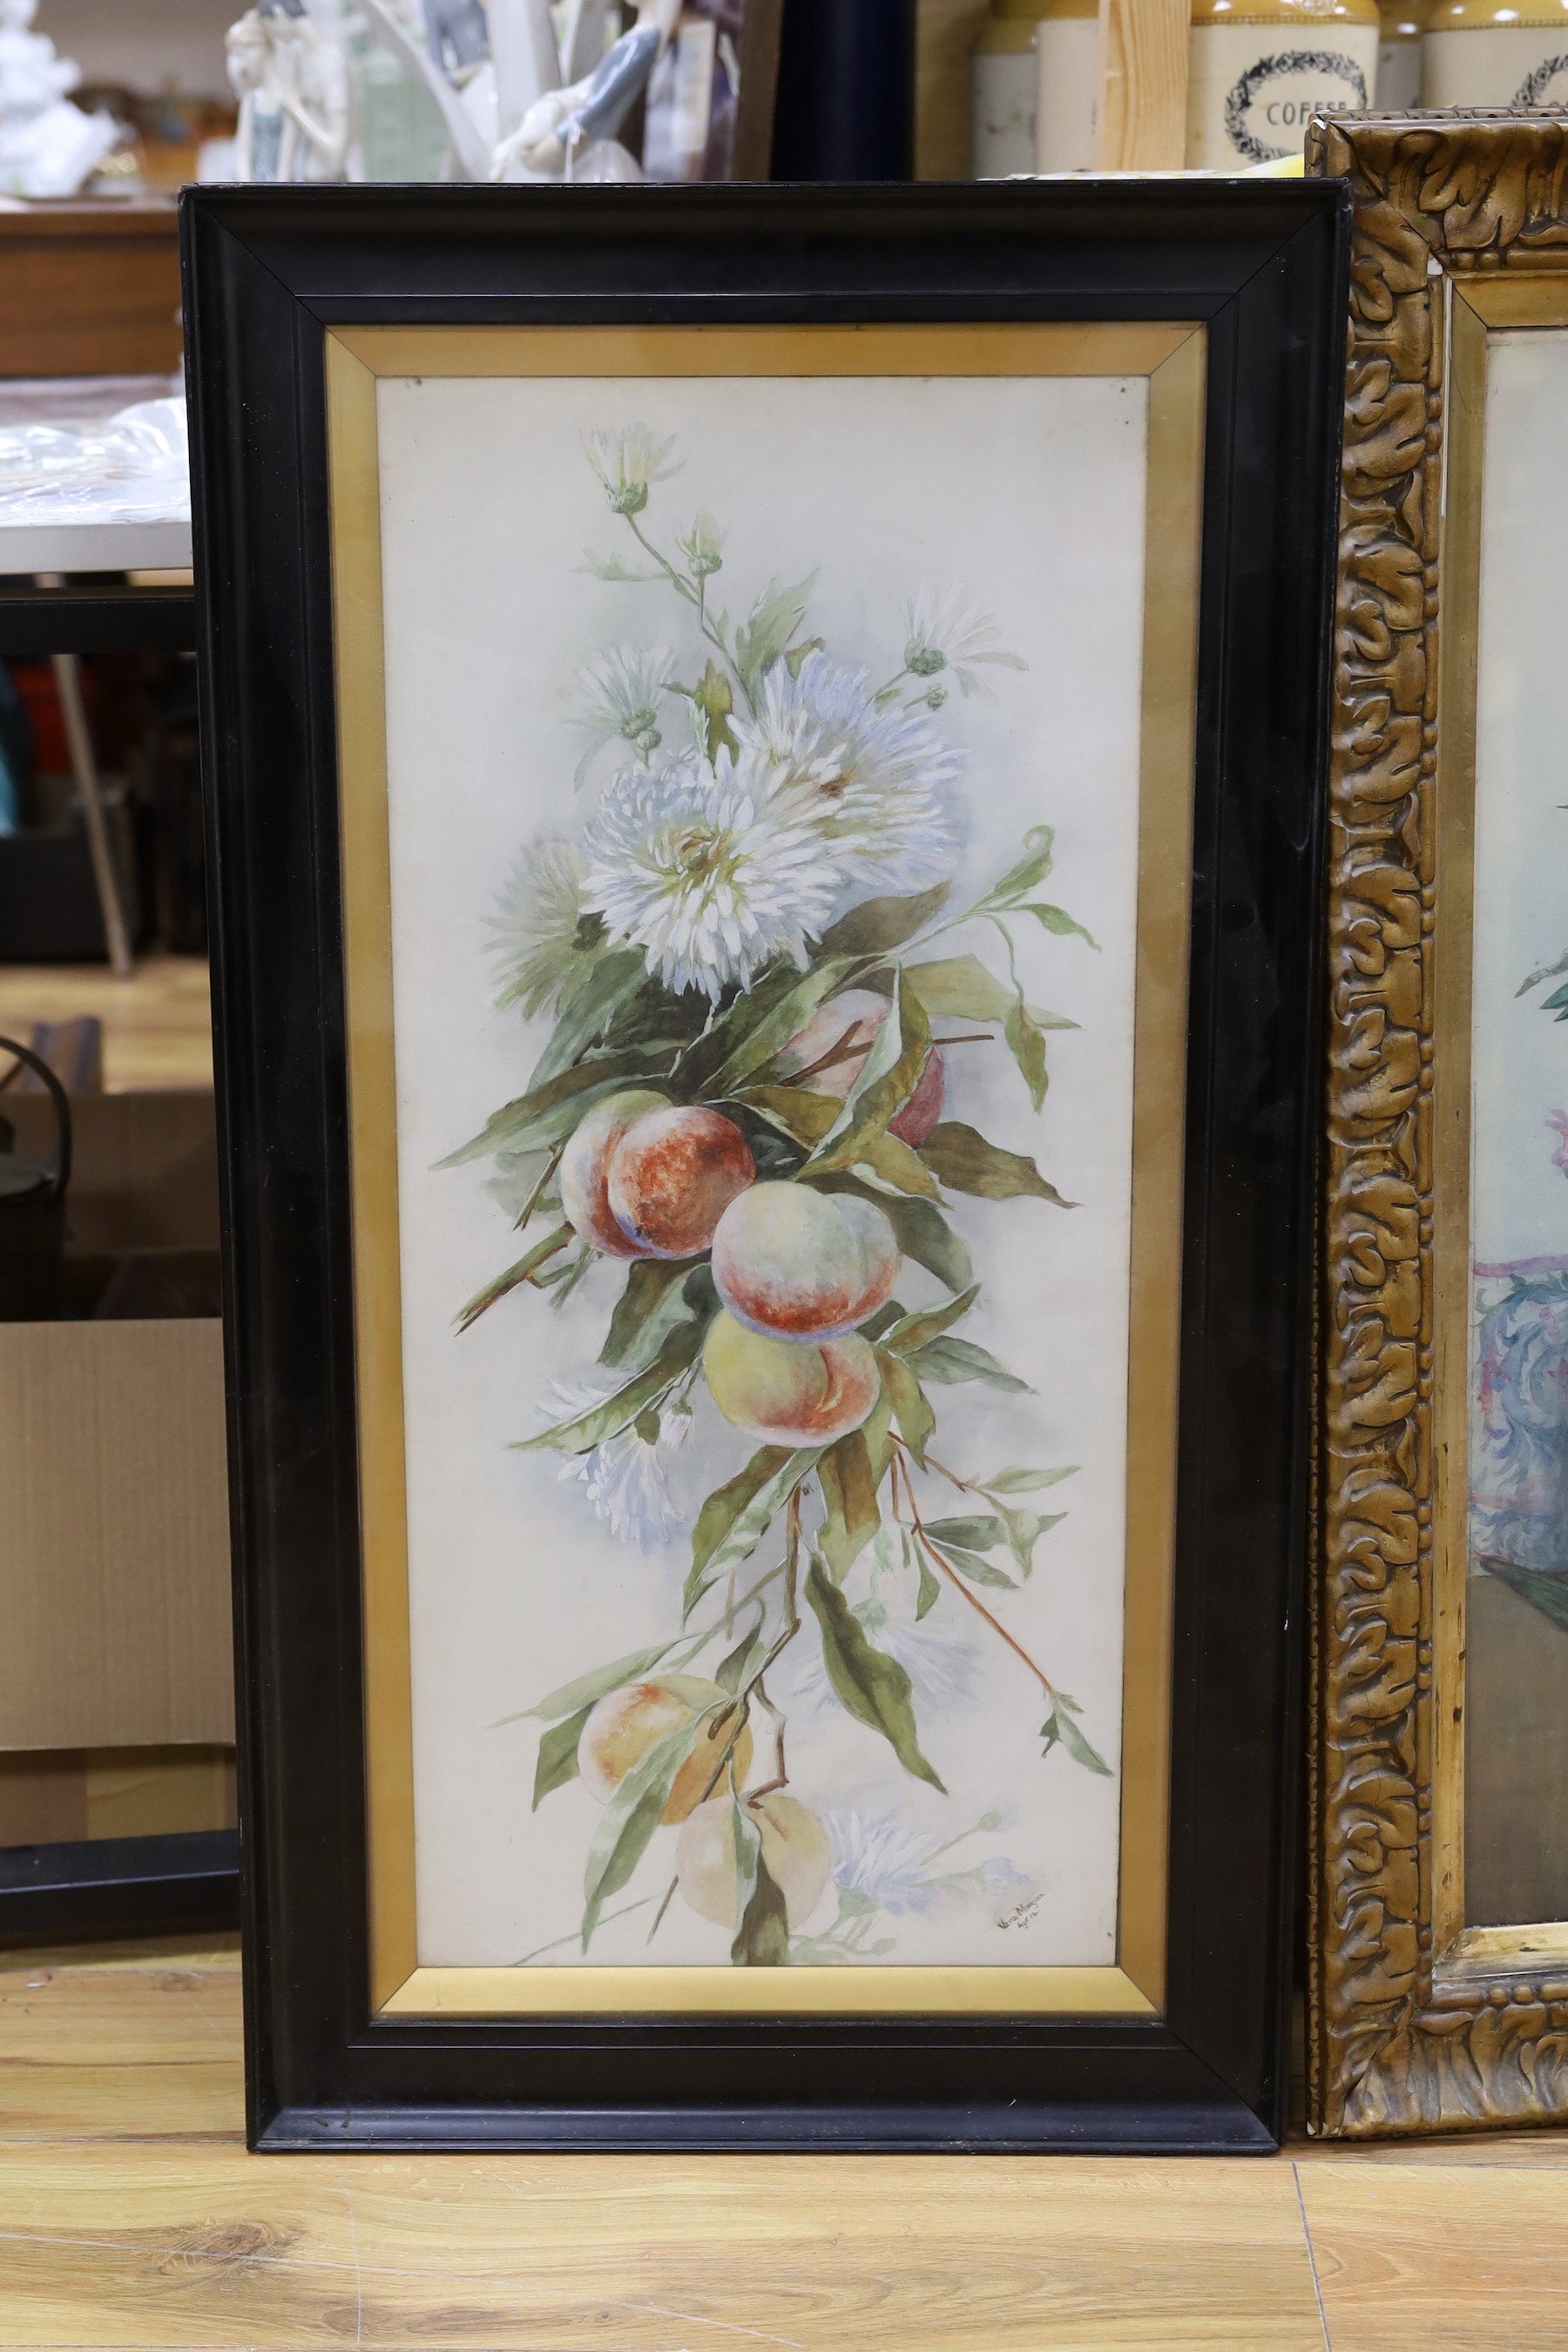 Gwyneth Jones, watercolour, Woodland blossoms, and a similar watercolour by Vera Morgan, both signed, largest 75 x 32cm